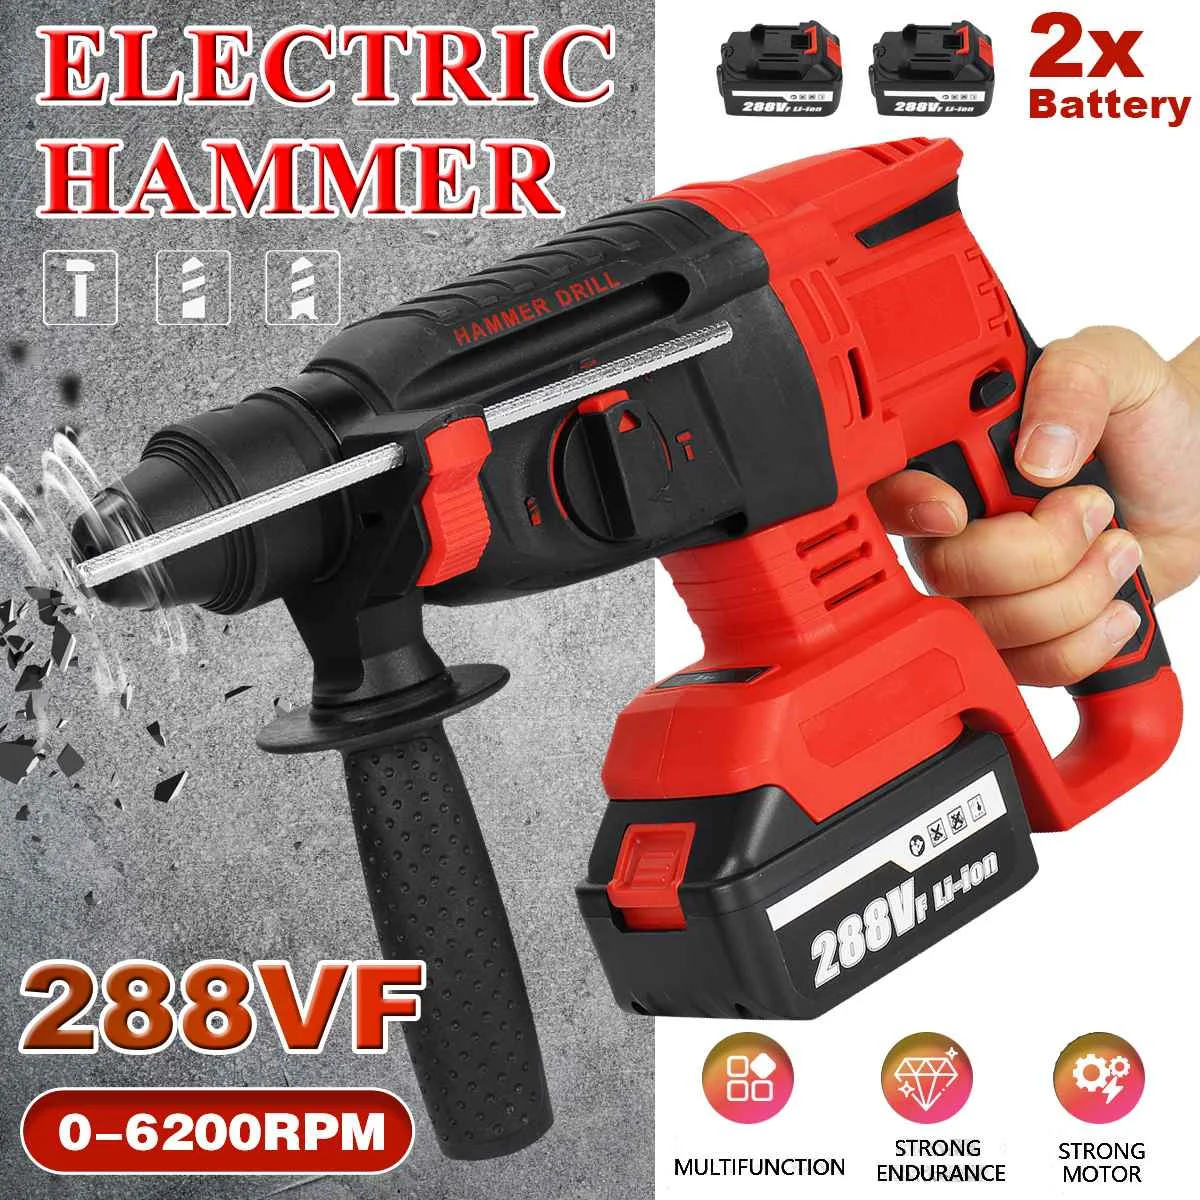 

NEW 288VF Brushless Electric Rotary Hammer Rechargeable Multifunction Electric Hammer Impact Power Drill Tool With 1/2 Battery